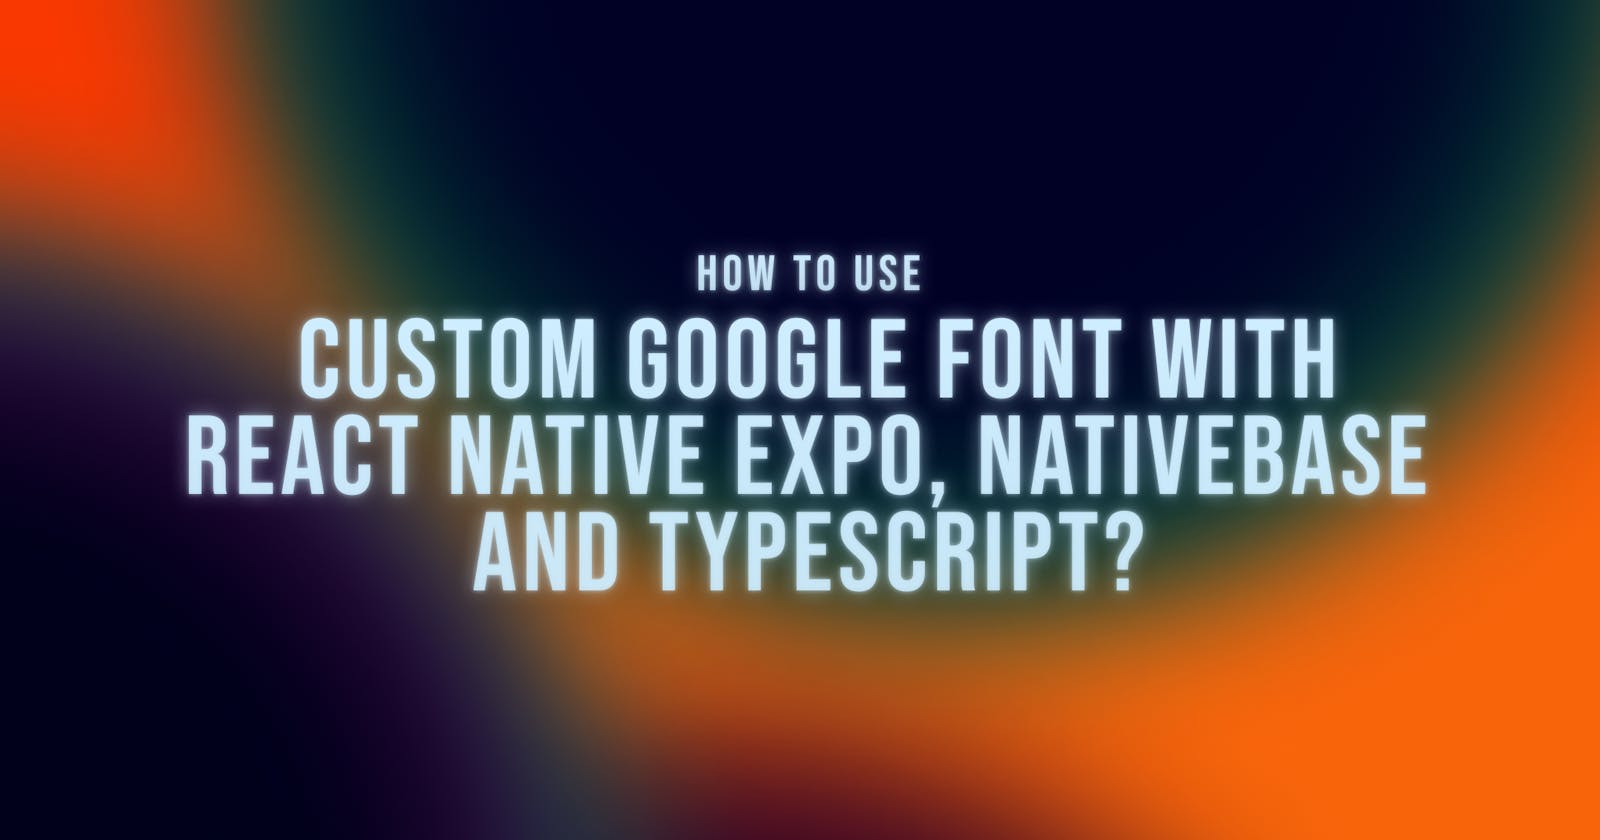 How to use custom google font with react native expo, NativeBase and Typescript?